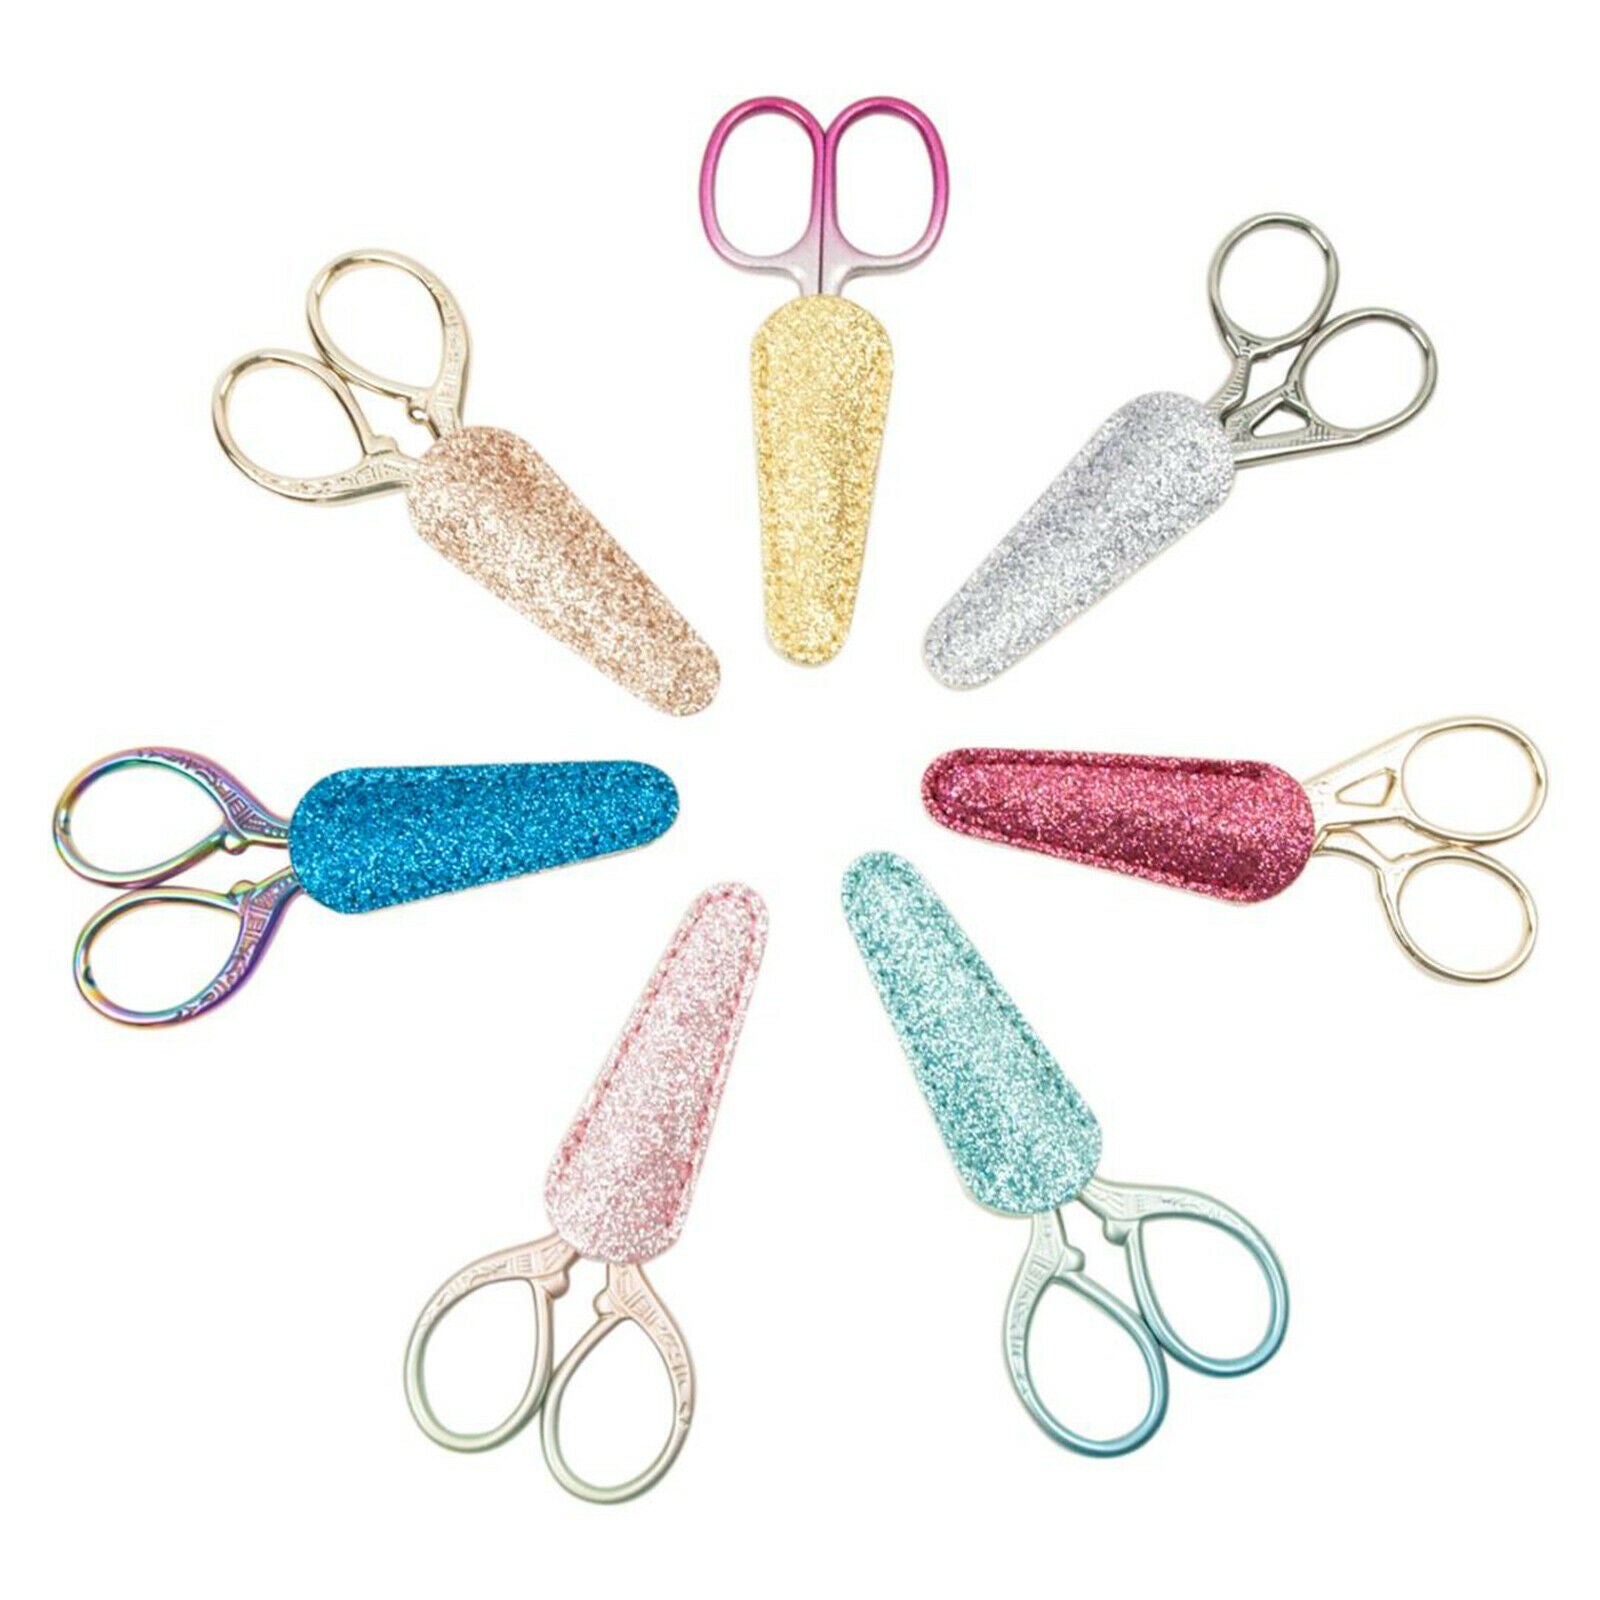 7x Embroidery Scissors Sheath Sewing Protector Cover Collect Bags Trimming